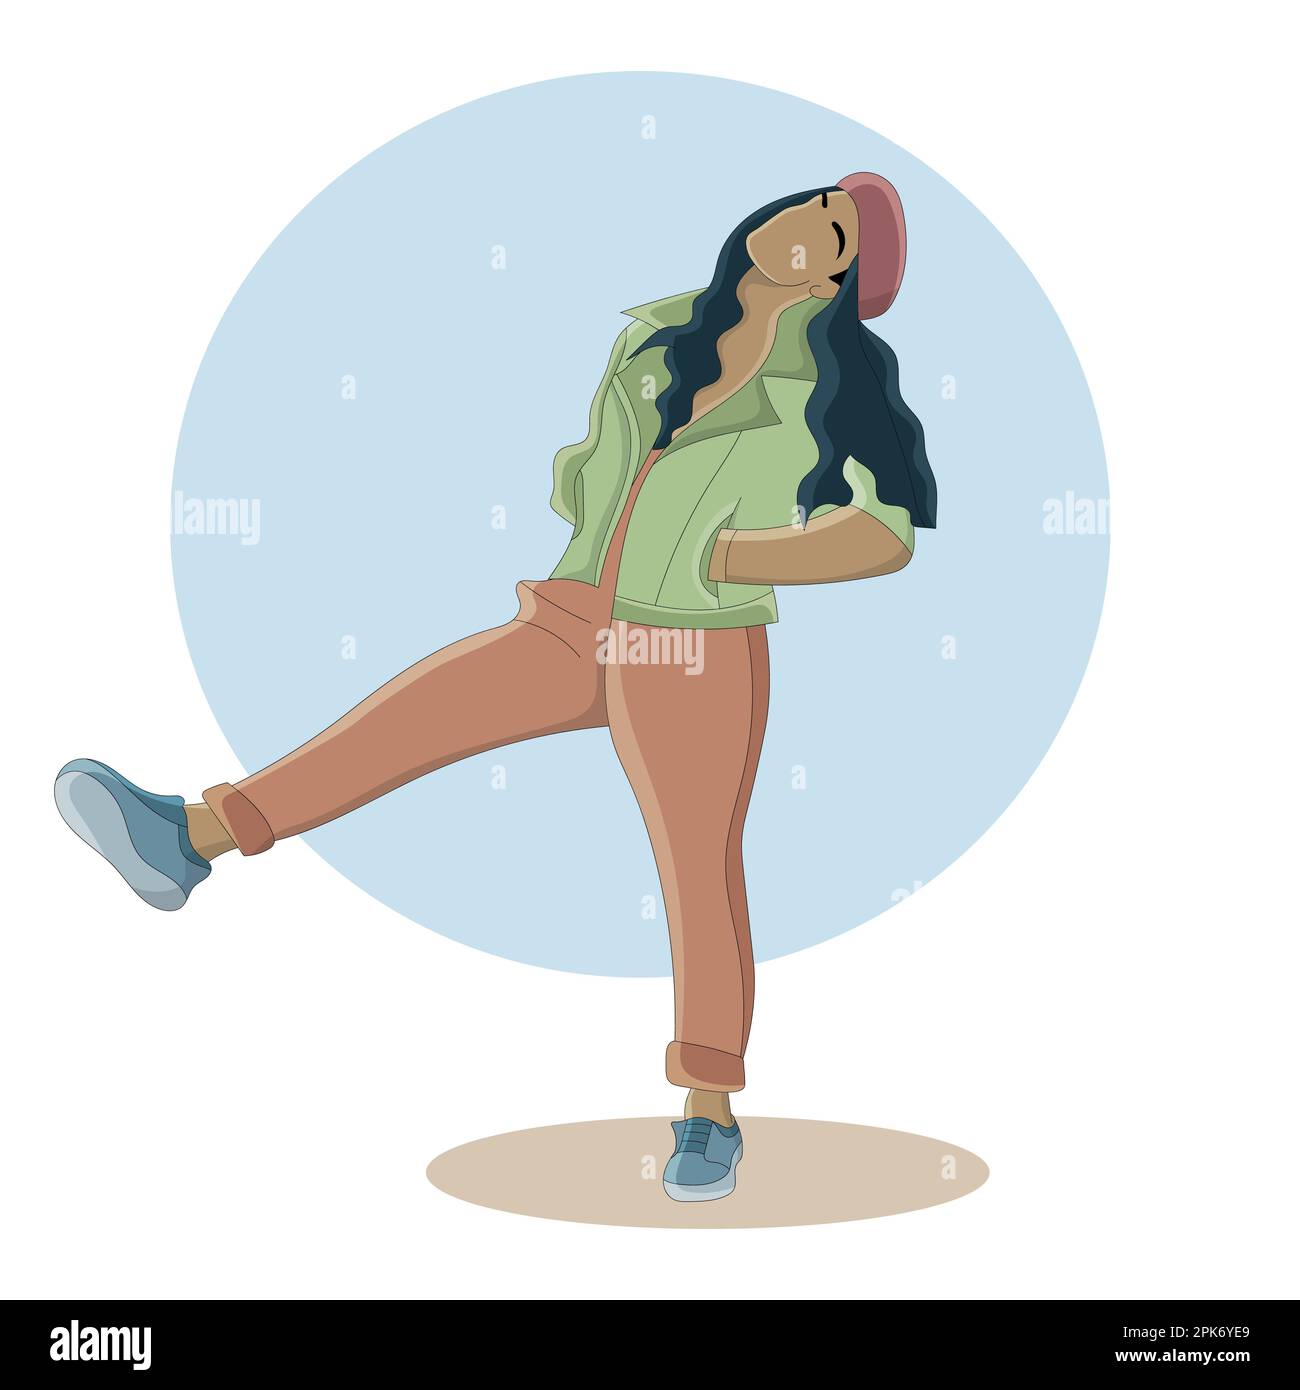 Flat design of a freely walking girl wearing a hat Stock Vector